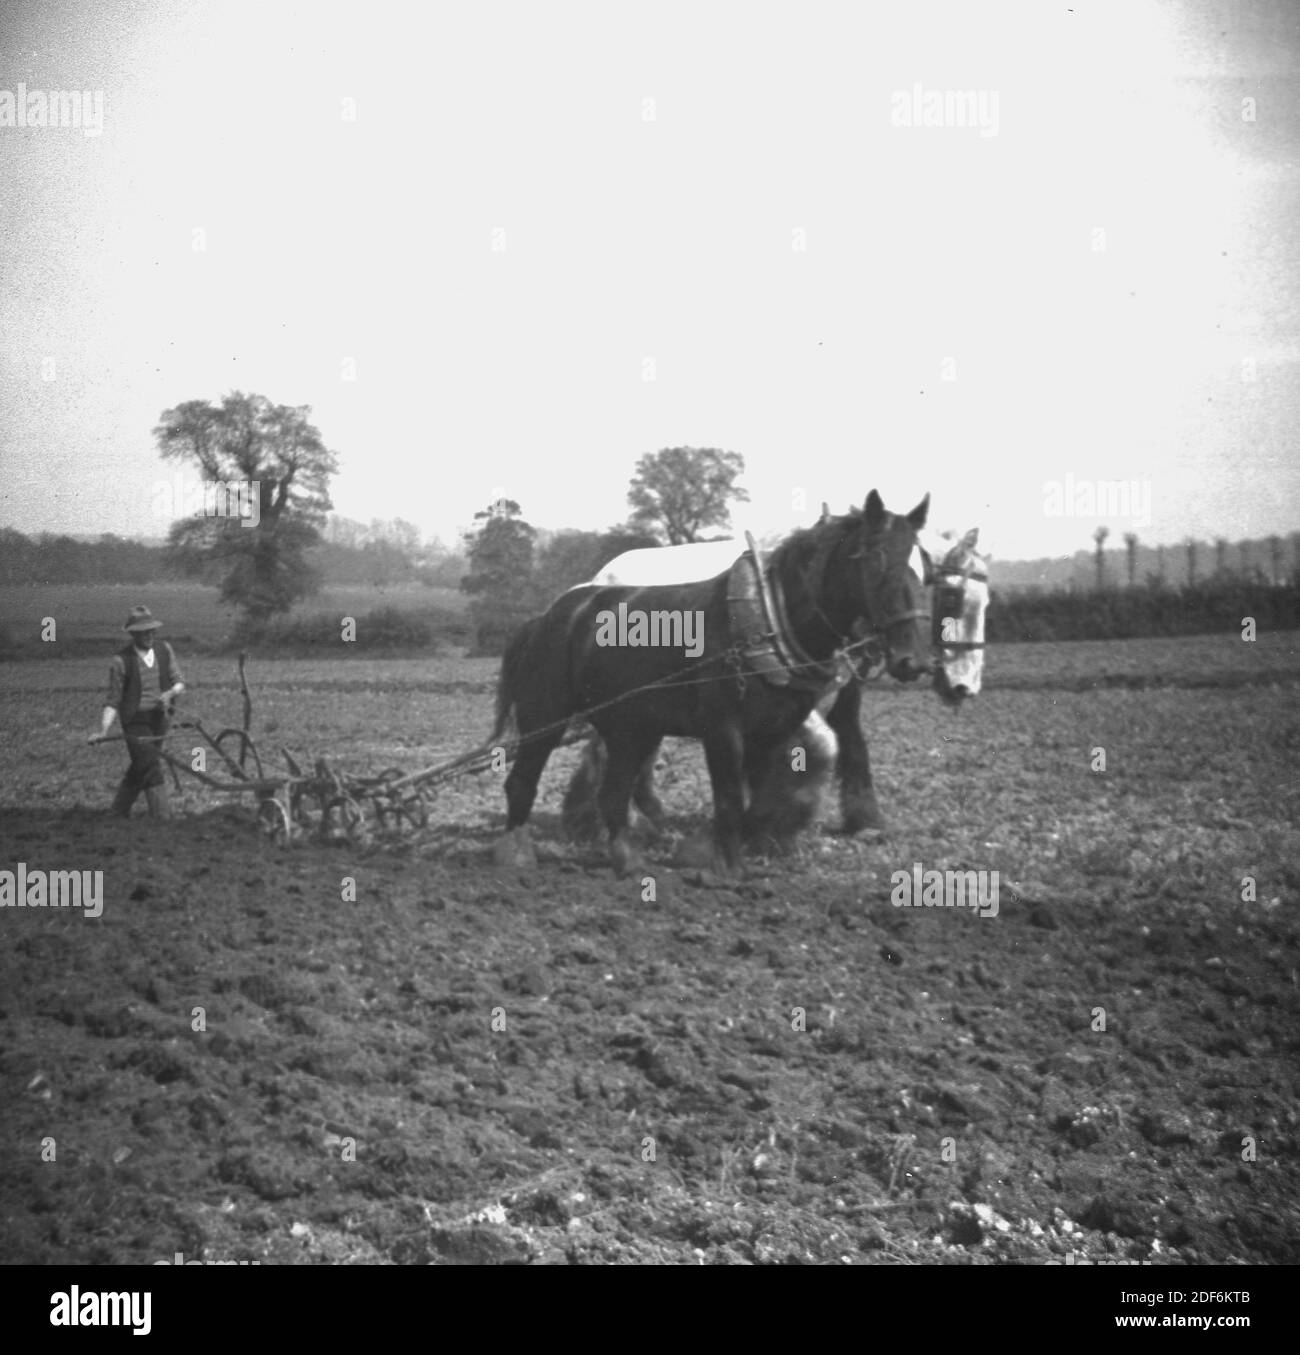 1940s, historical, a farmer in field steering a plough being pulled by two shire horses England, UK. Before mechanisation, this was the traditional method of ploughing or turning the soil in a field for new planting but was intensive manual work. The use of horses rather than the original oxen meant more acres of land could be ploughed per day as the horses were faster. An amazing farm tool, the plough has been used for around 4,000 years and while there have been some improvements, the basic technology has remained the same, that of cutting a long slice of soil and  turning it upside down. Stock Photo